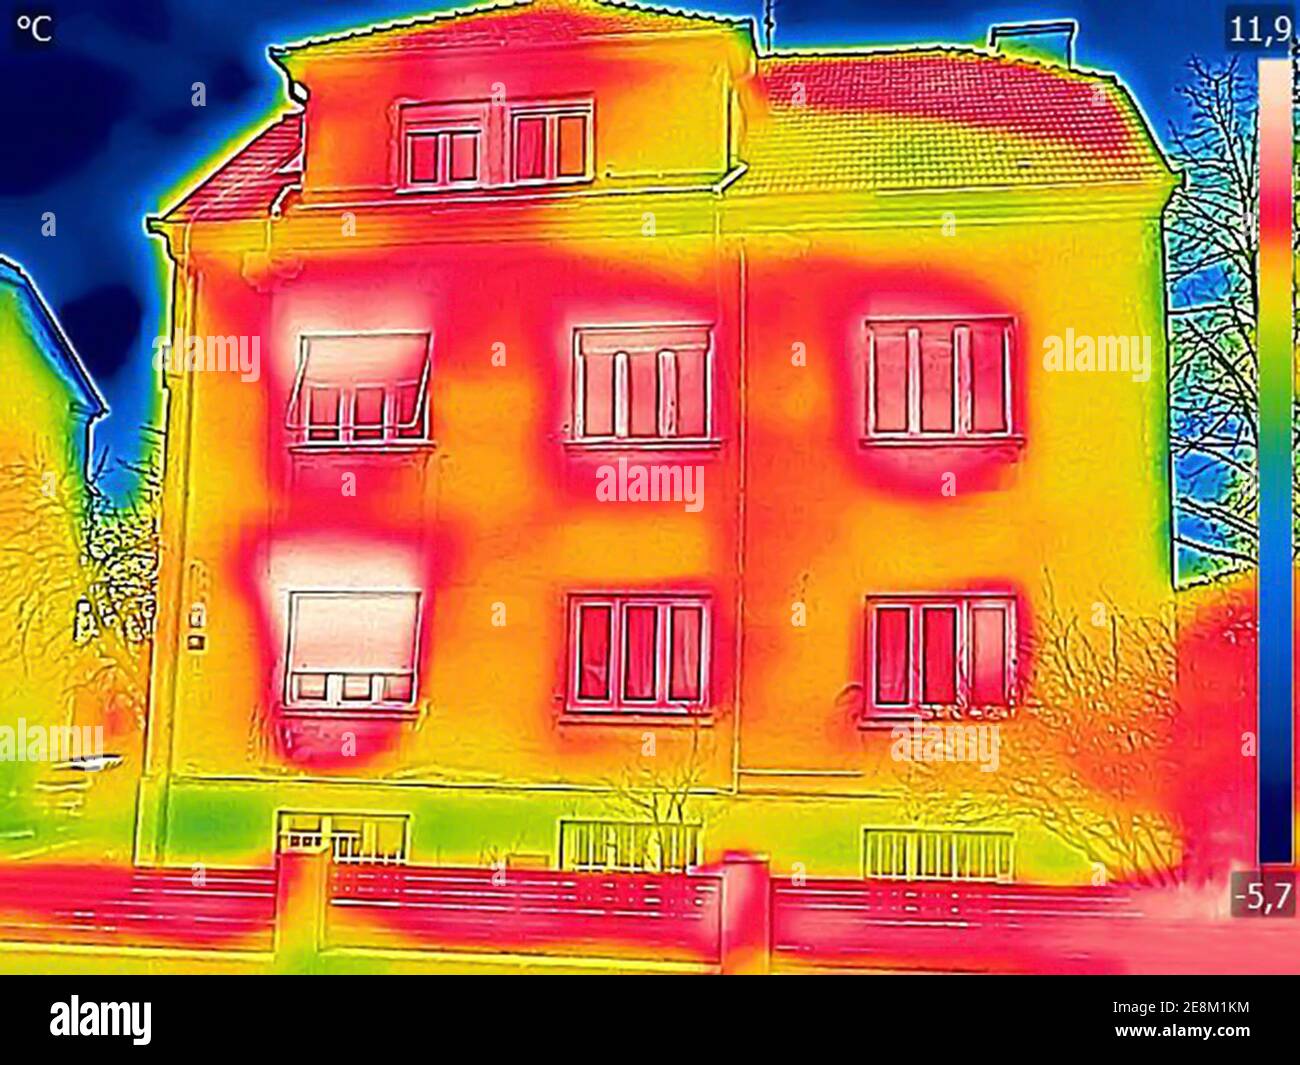 https://c8.alamy.com/comp/2E8M1KM/infrared-thermovision-image-showing-lack-of-thermal-insulation-on-house-2E8M1KM.jpg